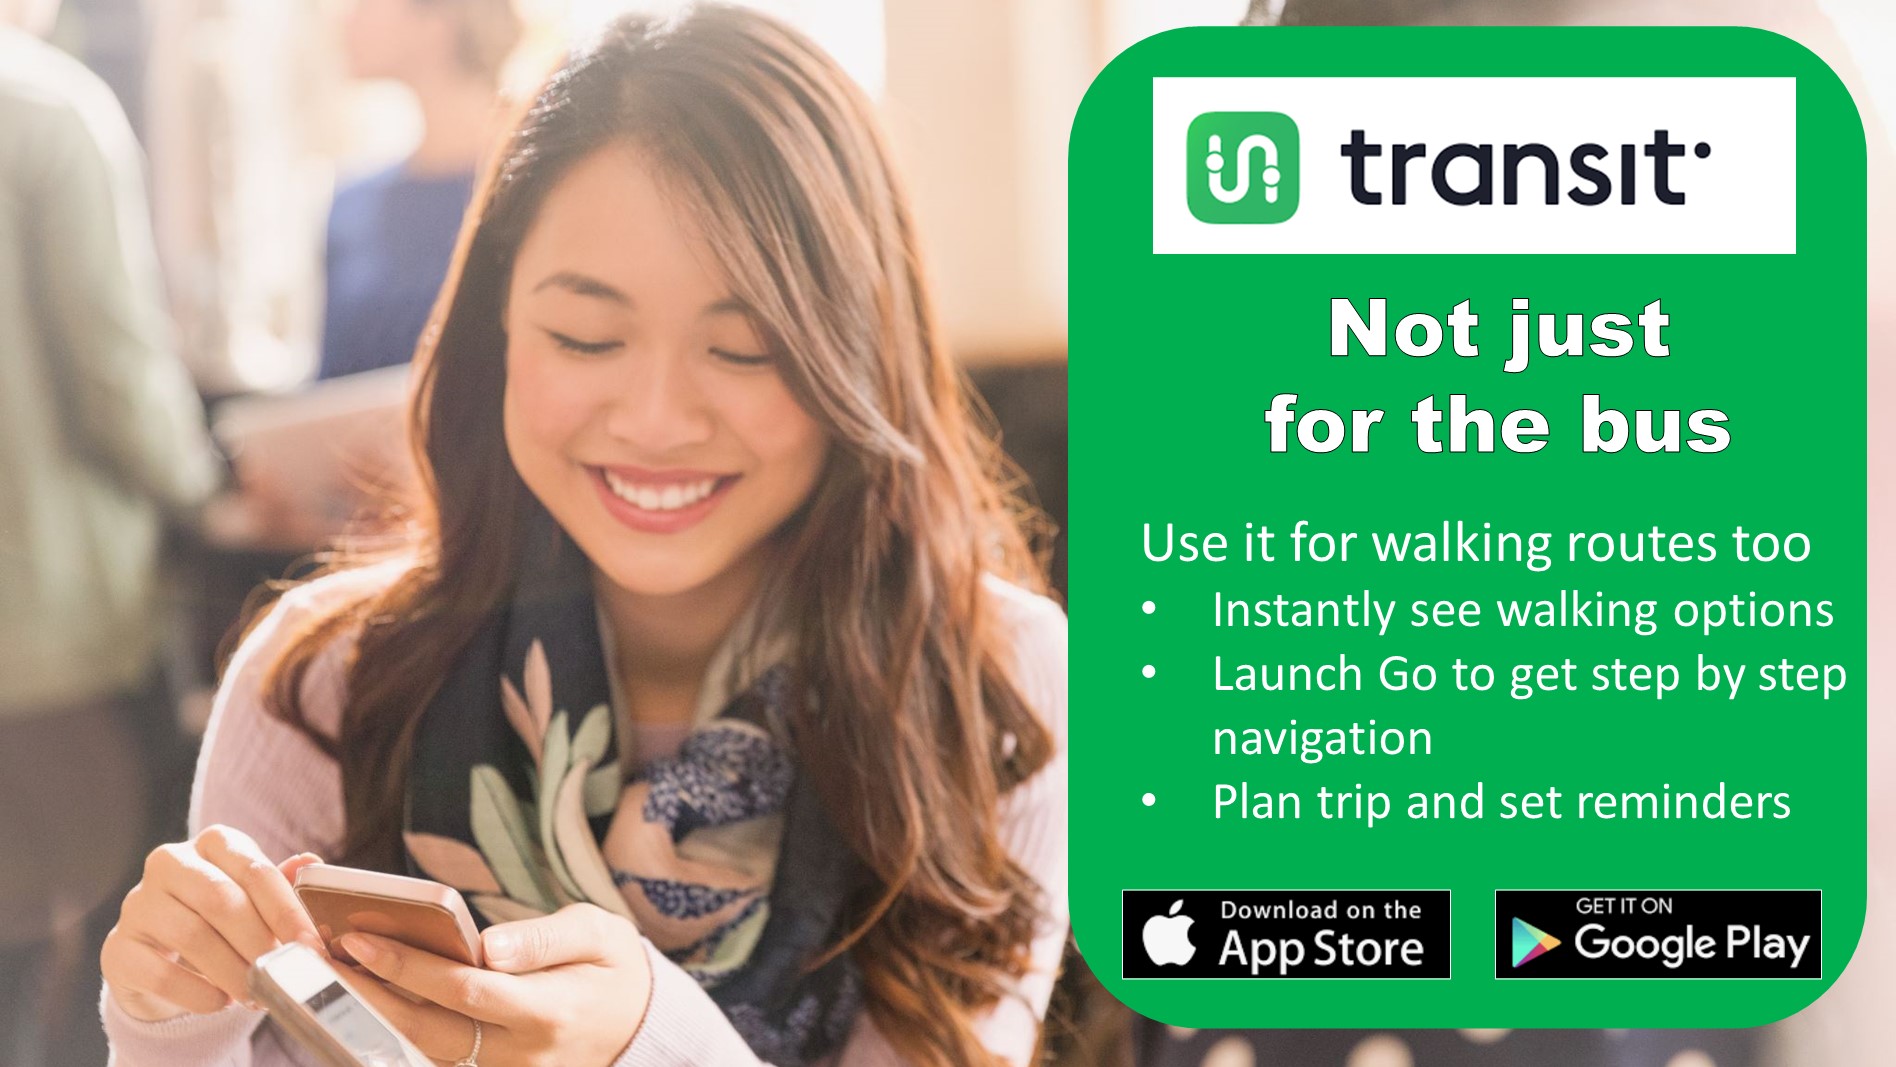 Use Transit app for walking routes